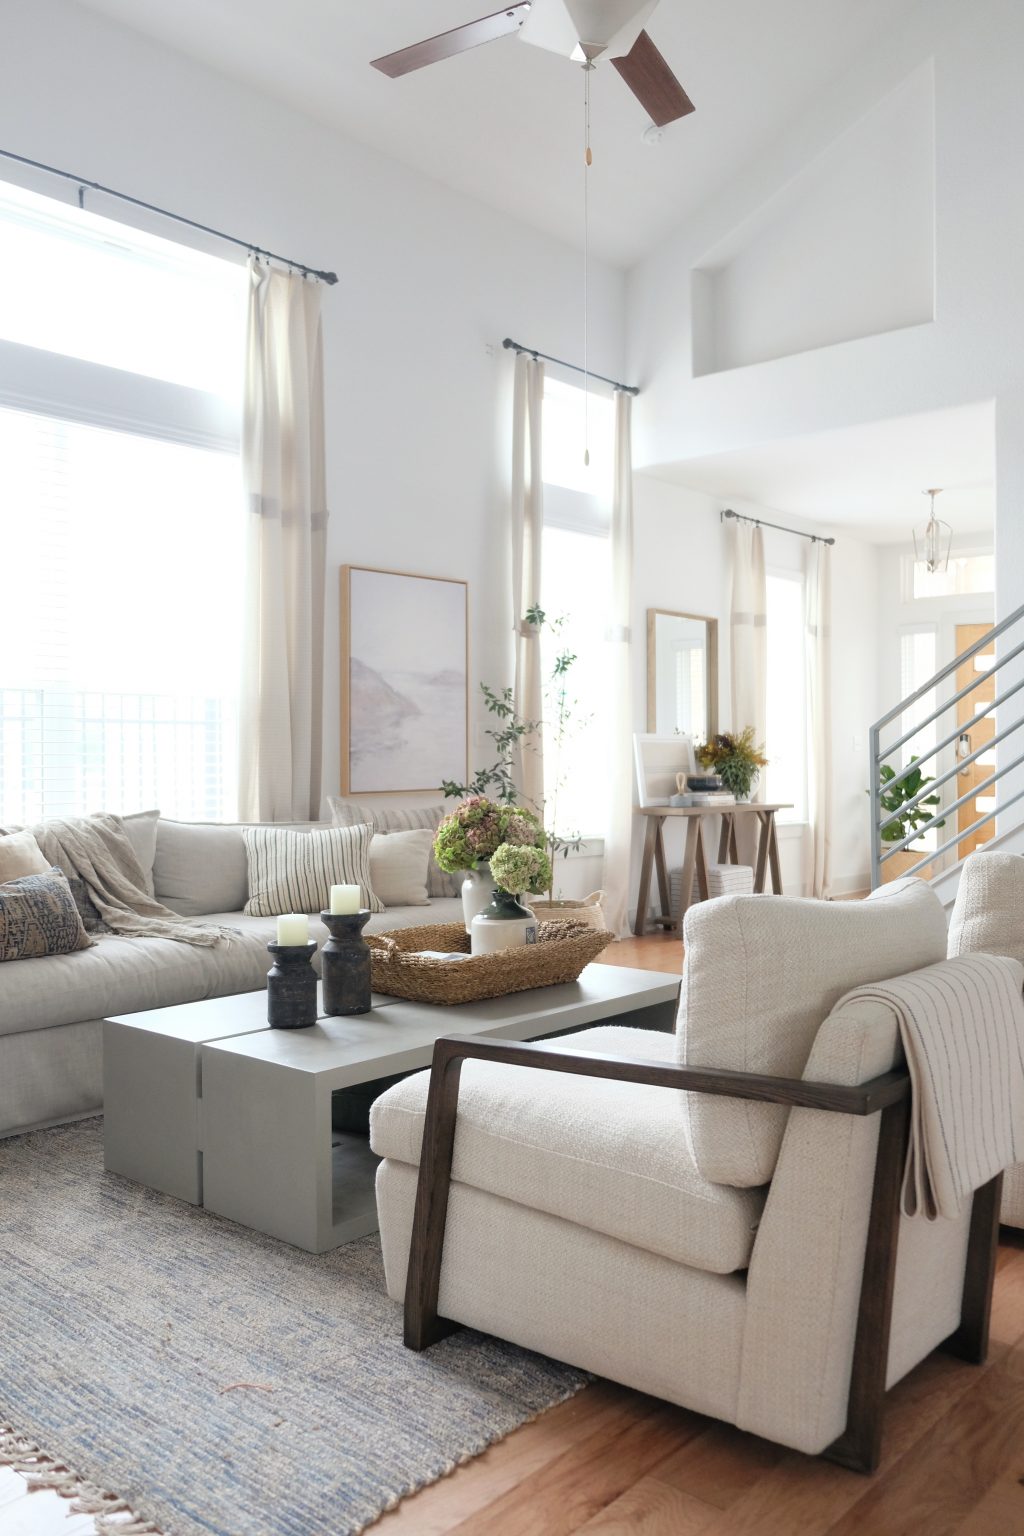 Mix & Match Living Room Furniture For A Curated Look